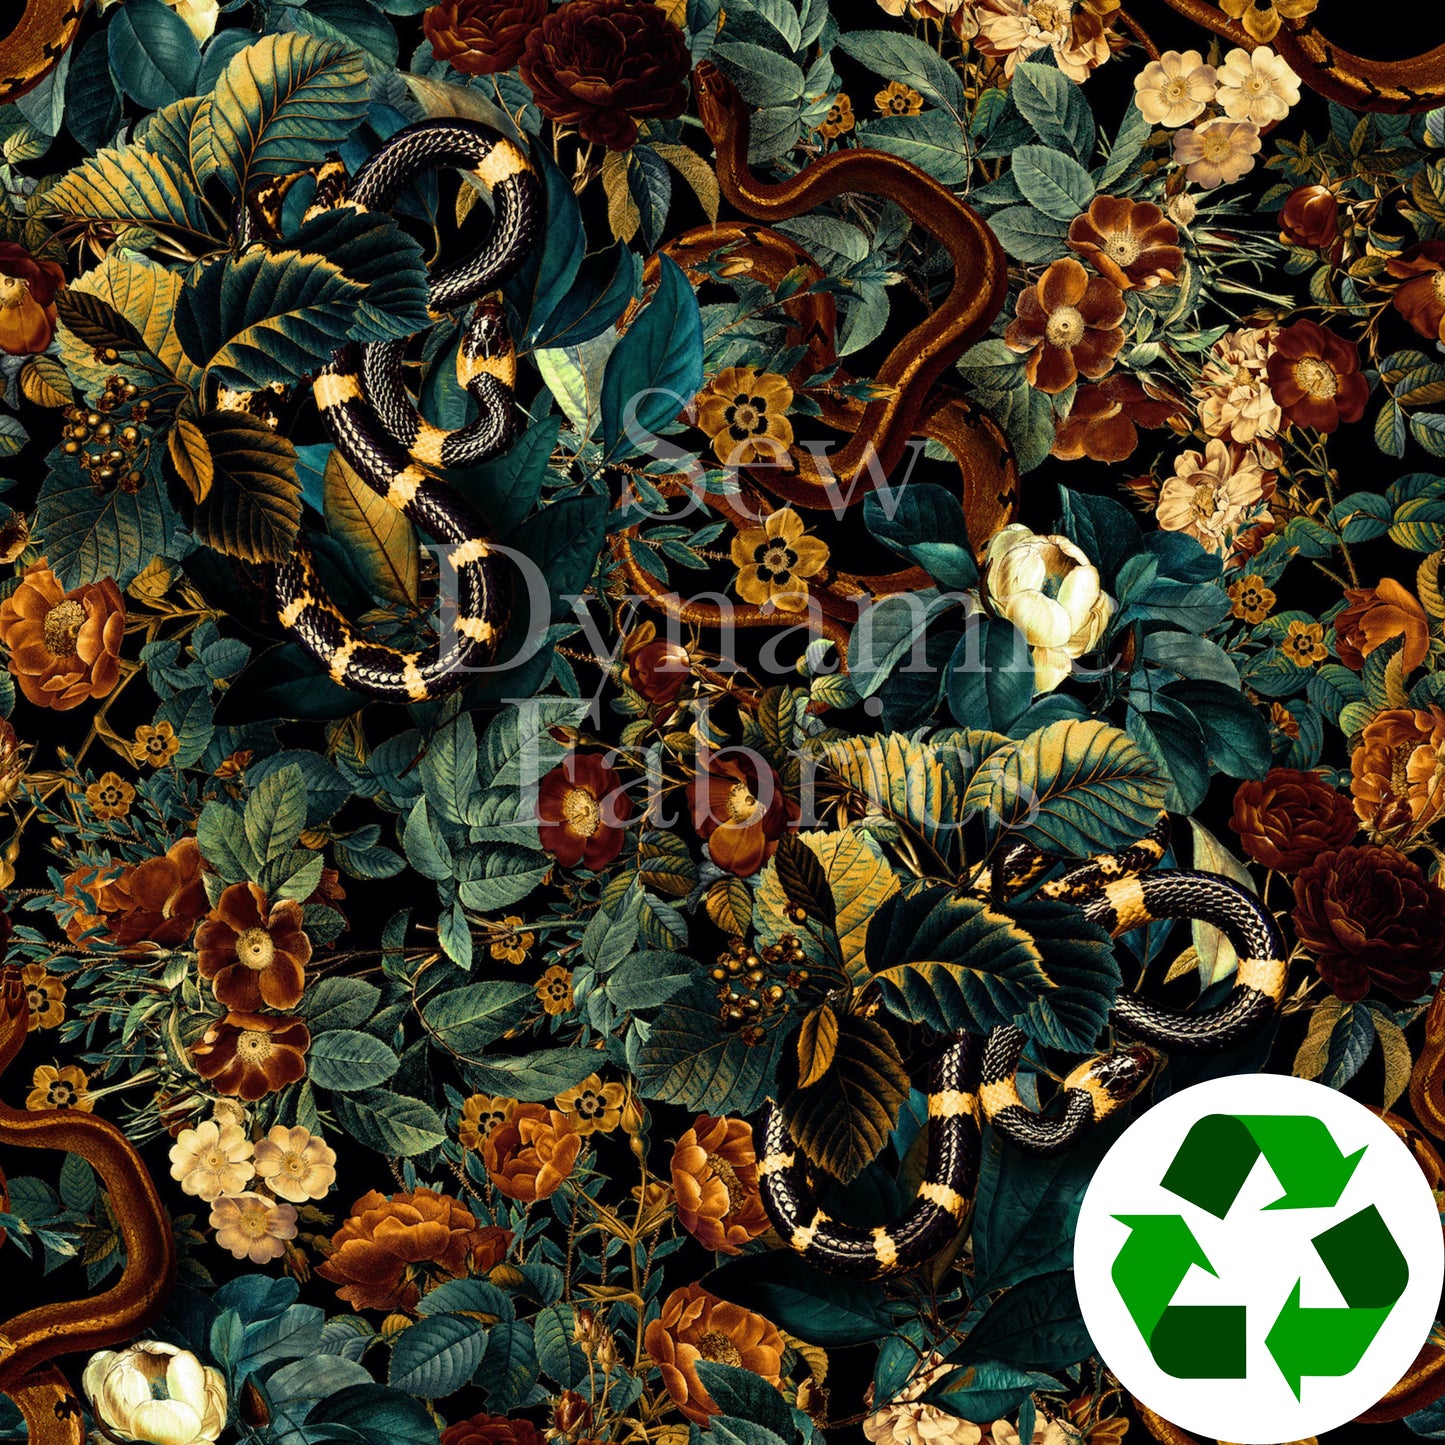 Recycled Canvas: Autumn Serpents